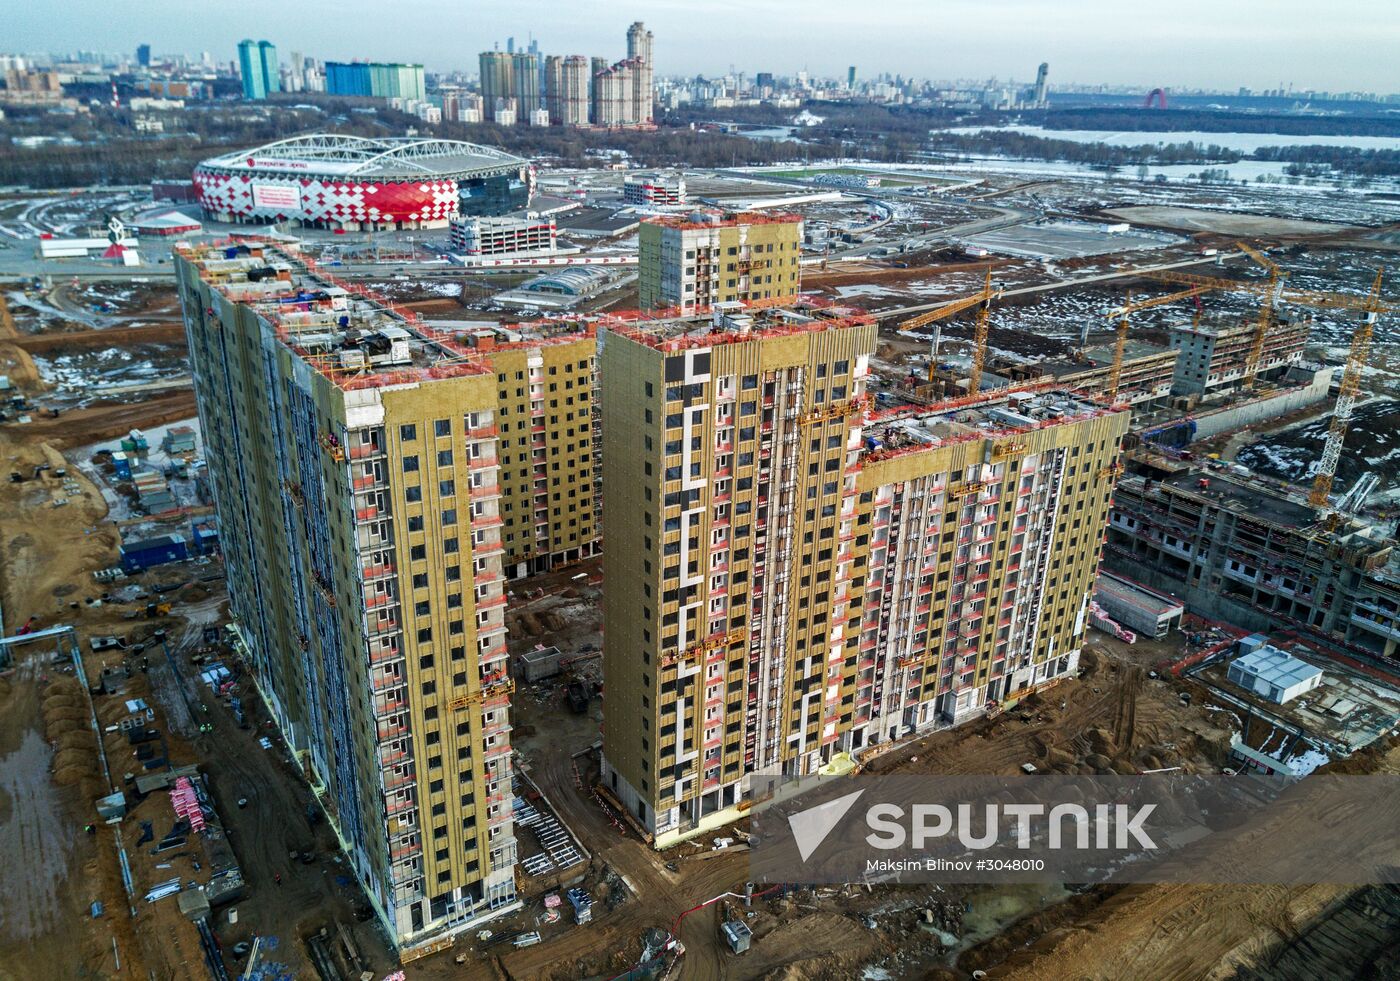 Housing construction in Moscow